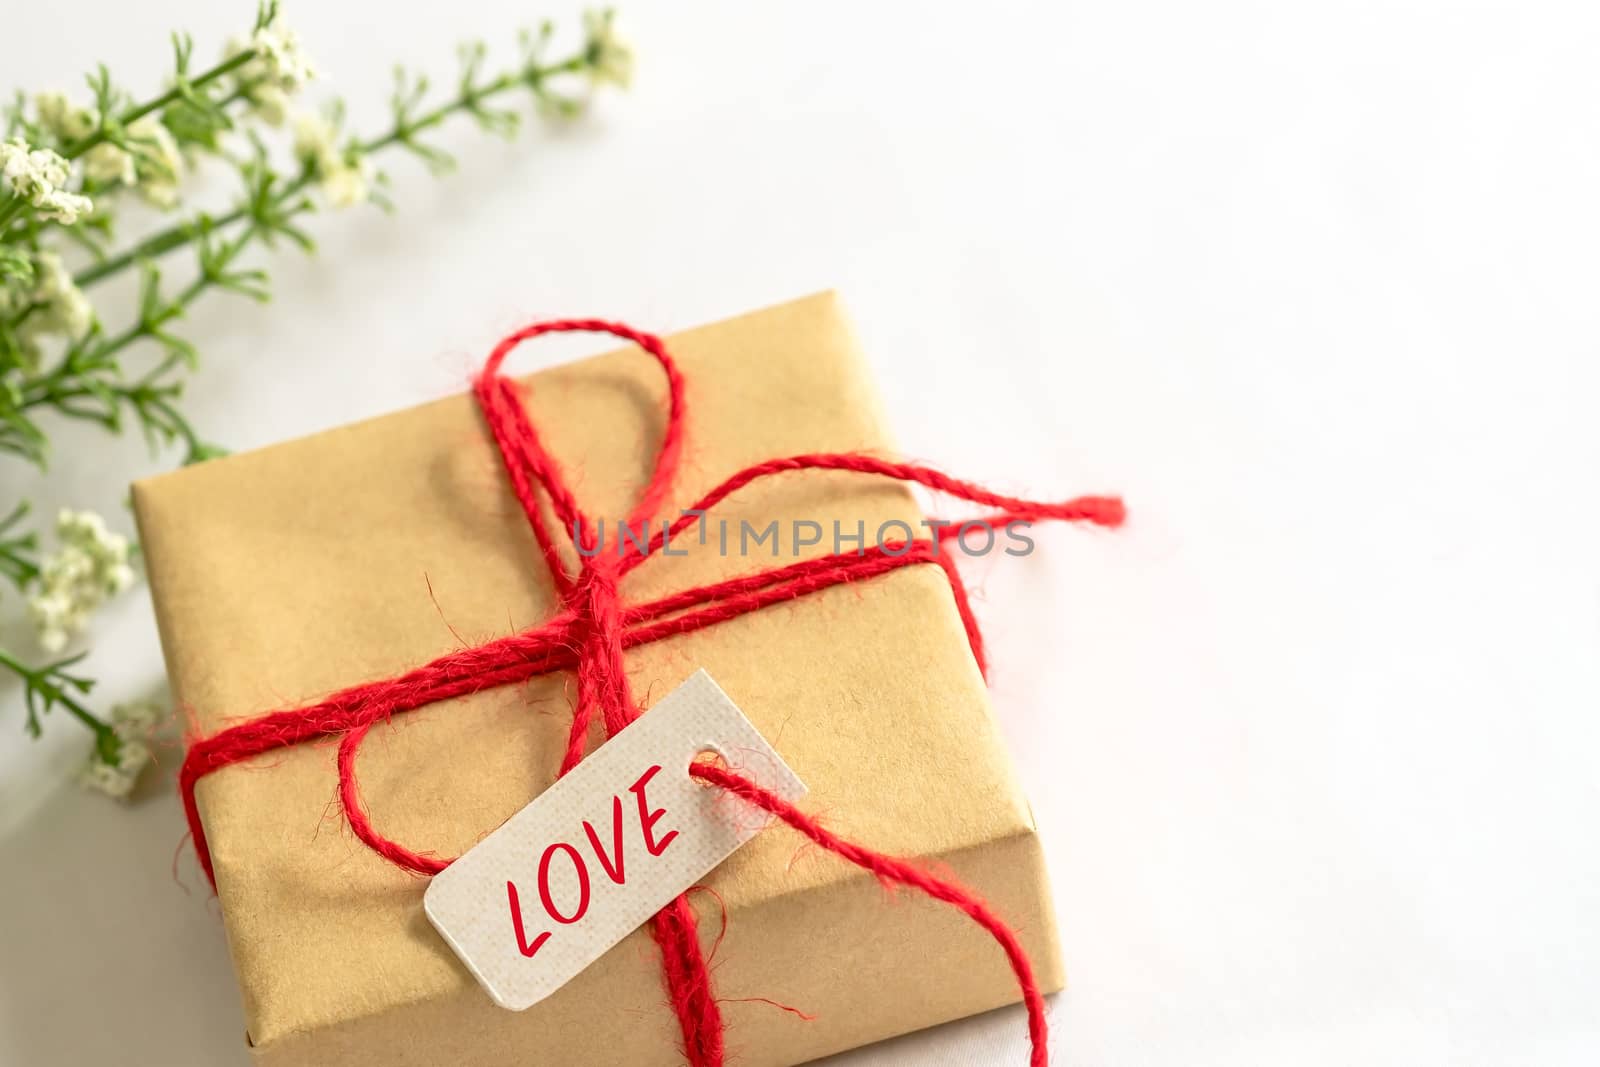 Gift box and flower, paper tag LOVE texting and copy space by psodaz